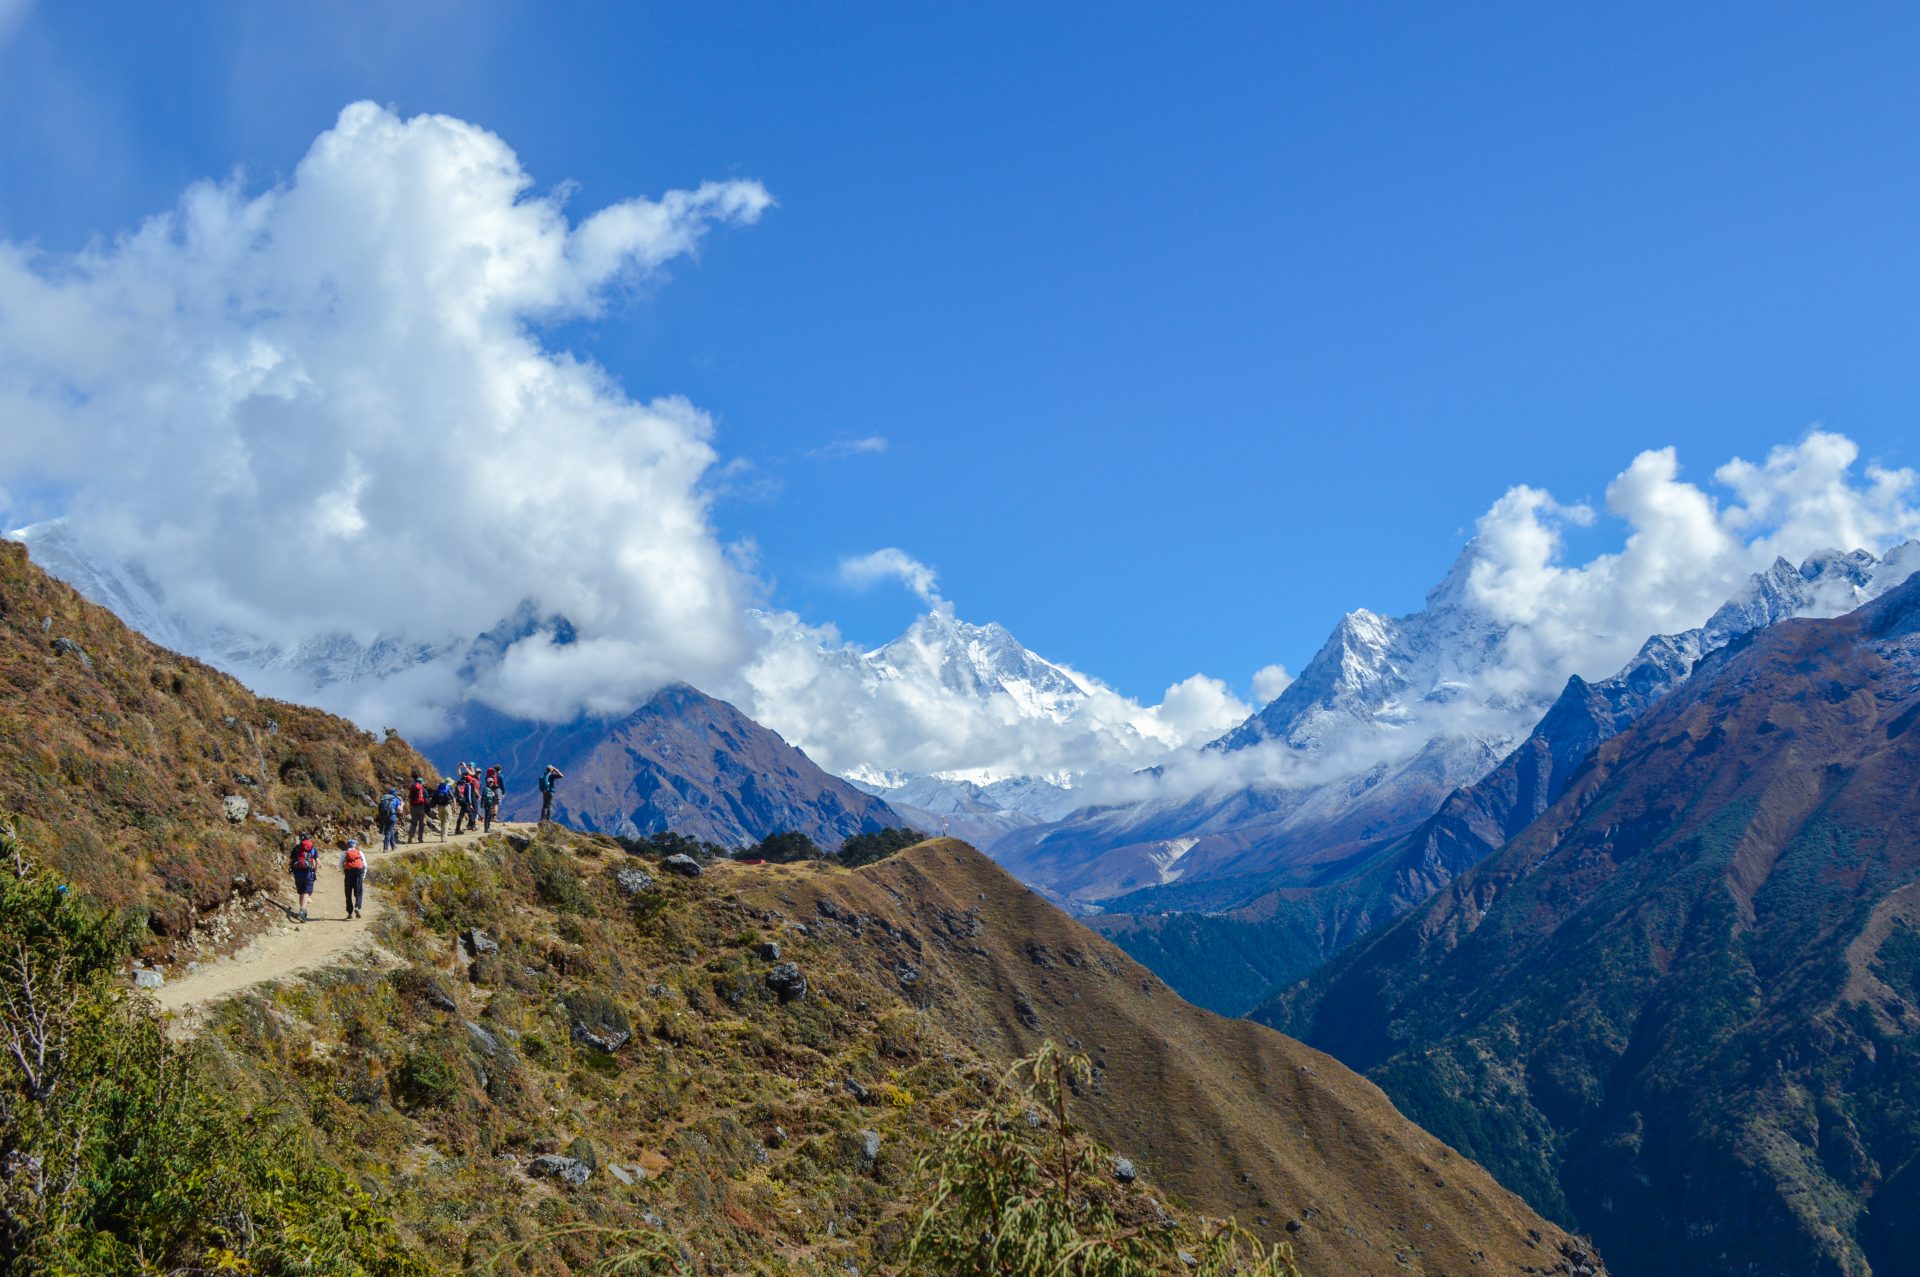 D3.14 A view at Shyangboche trekkers walking on the road and on the front having view of the mountain Range including Mt. Everest and Aamadeblam Windhorse Tours